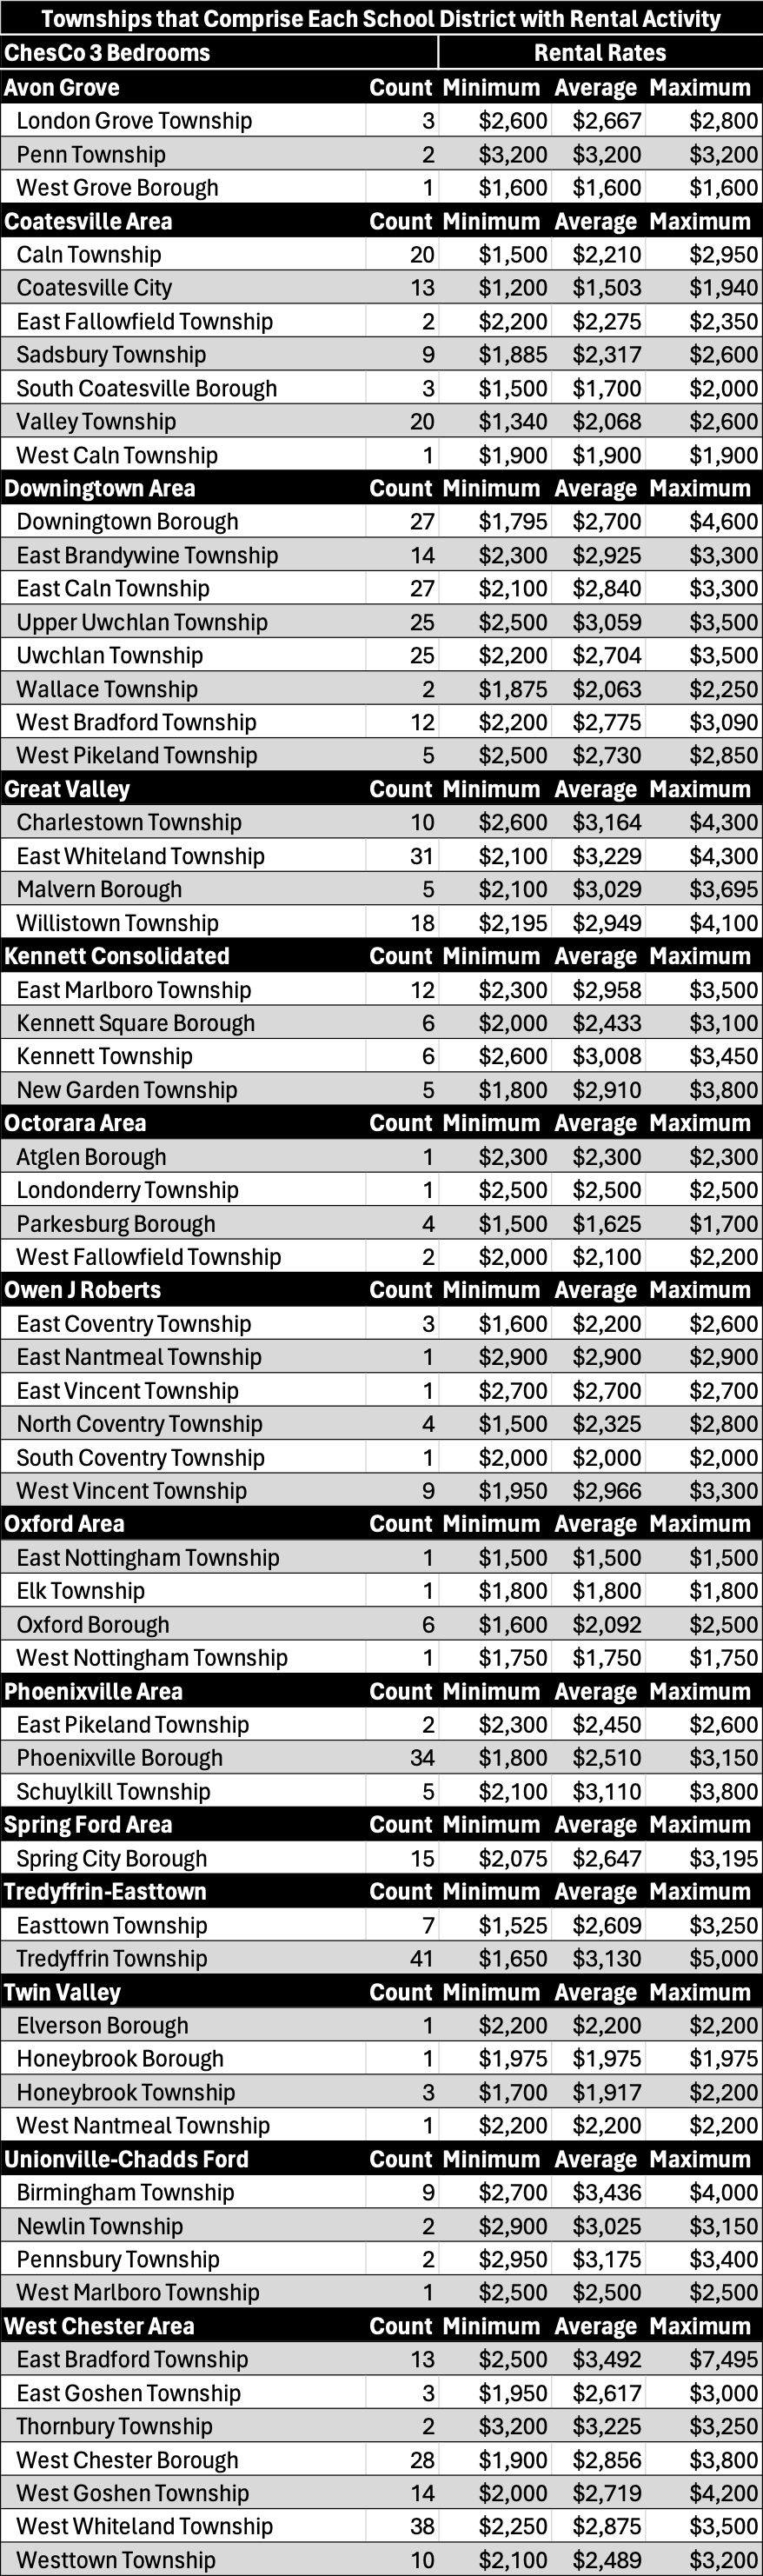 A table of each township within each School District in Chester County, PA for studios and 3 bedrooms, which includes the number of transactions and each township's corresponding rent prices displayed as minimum, average and maximum. 